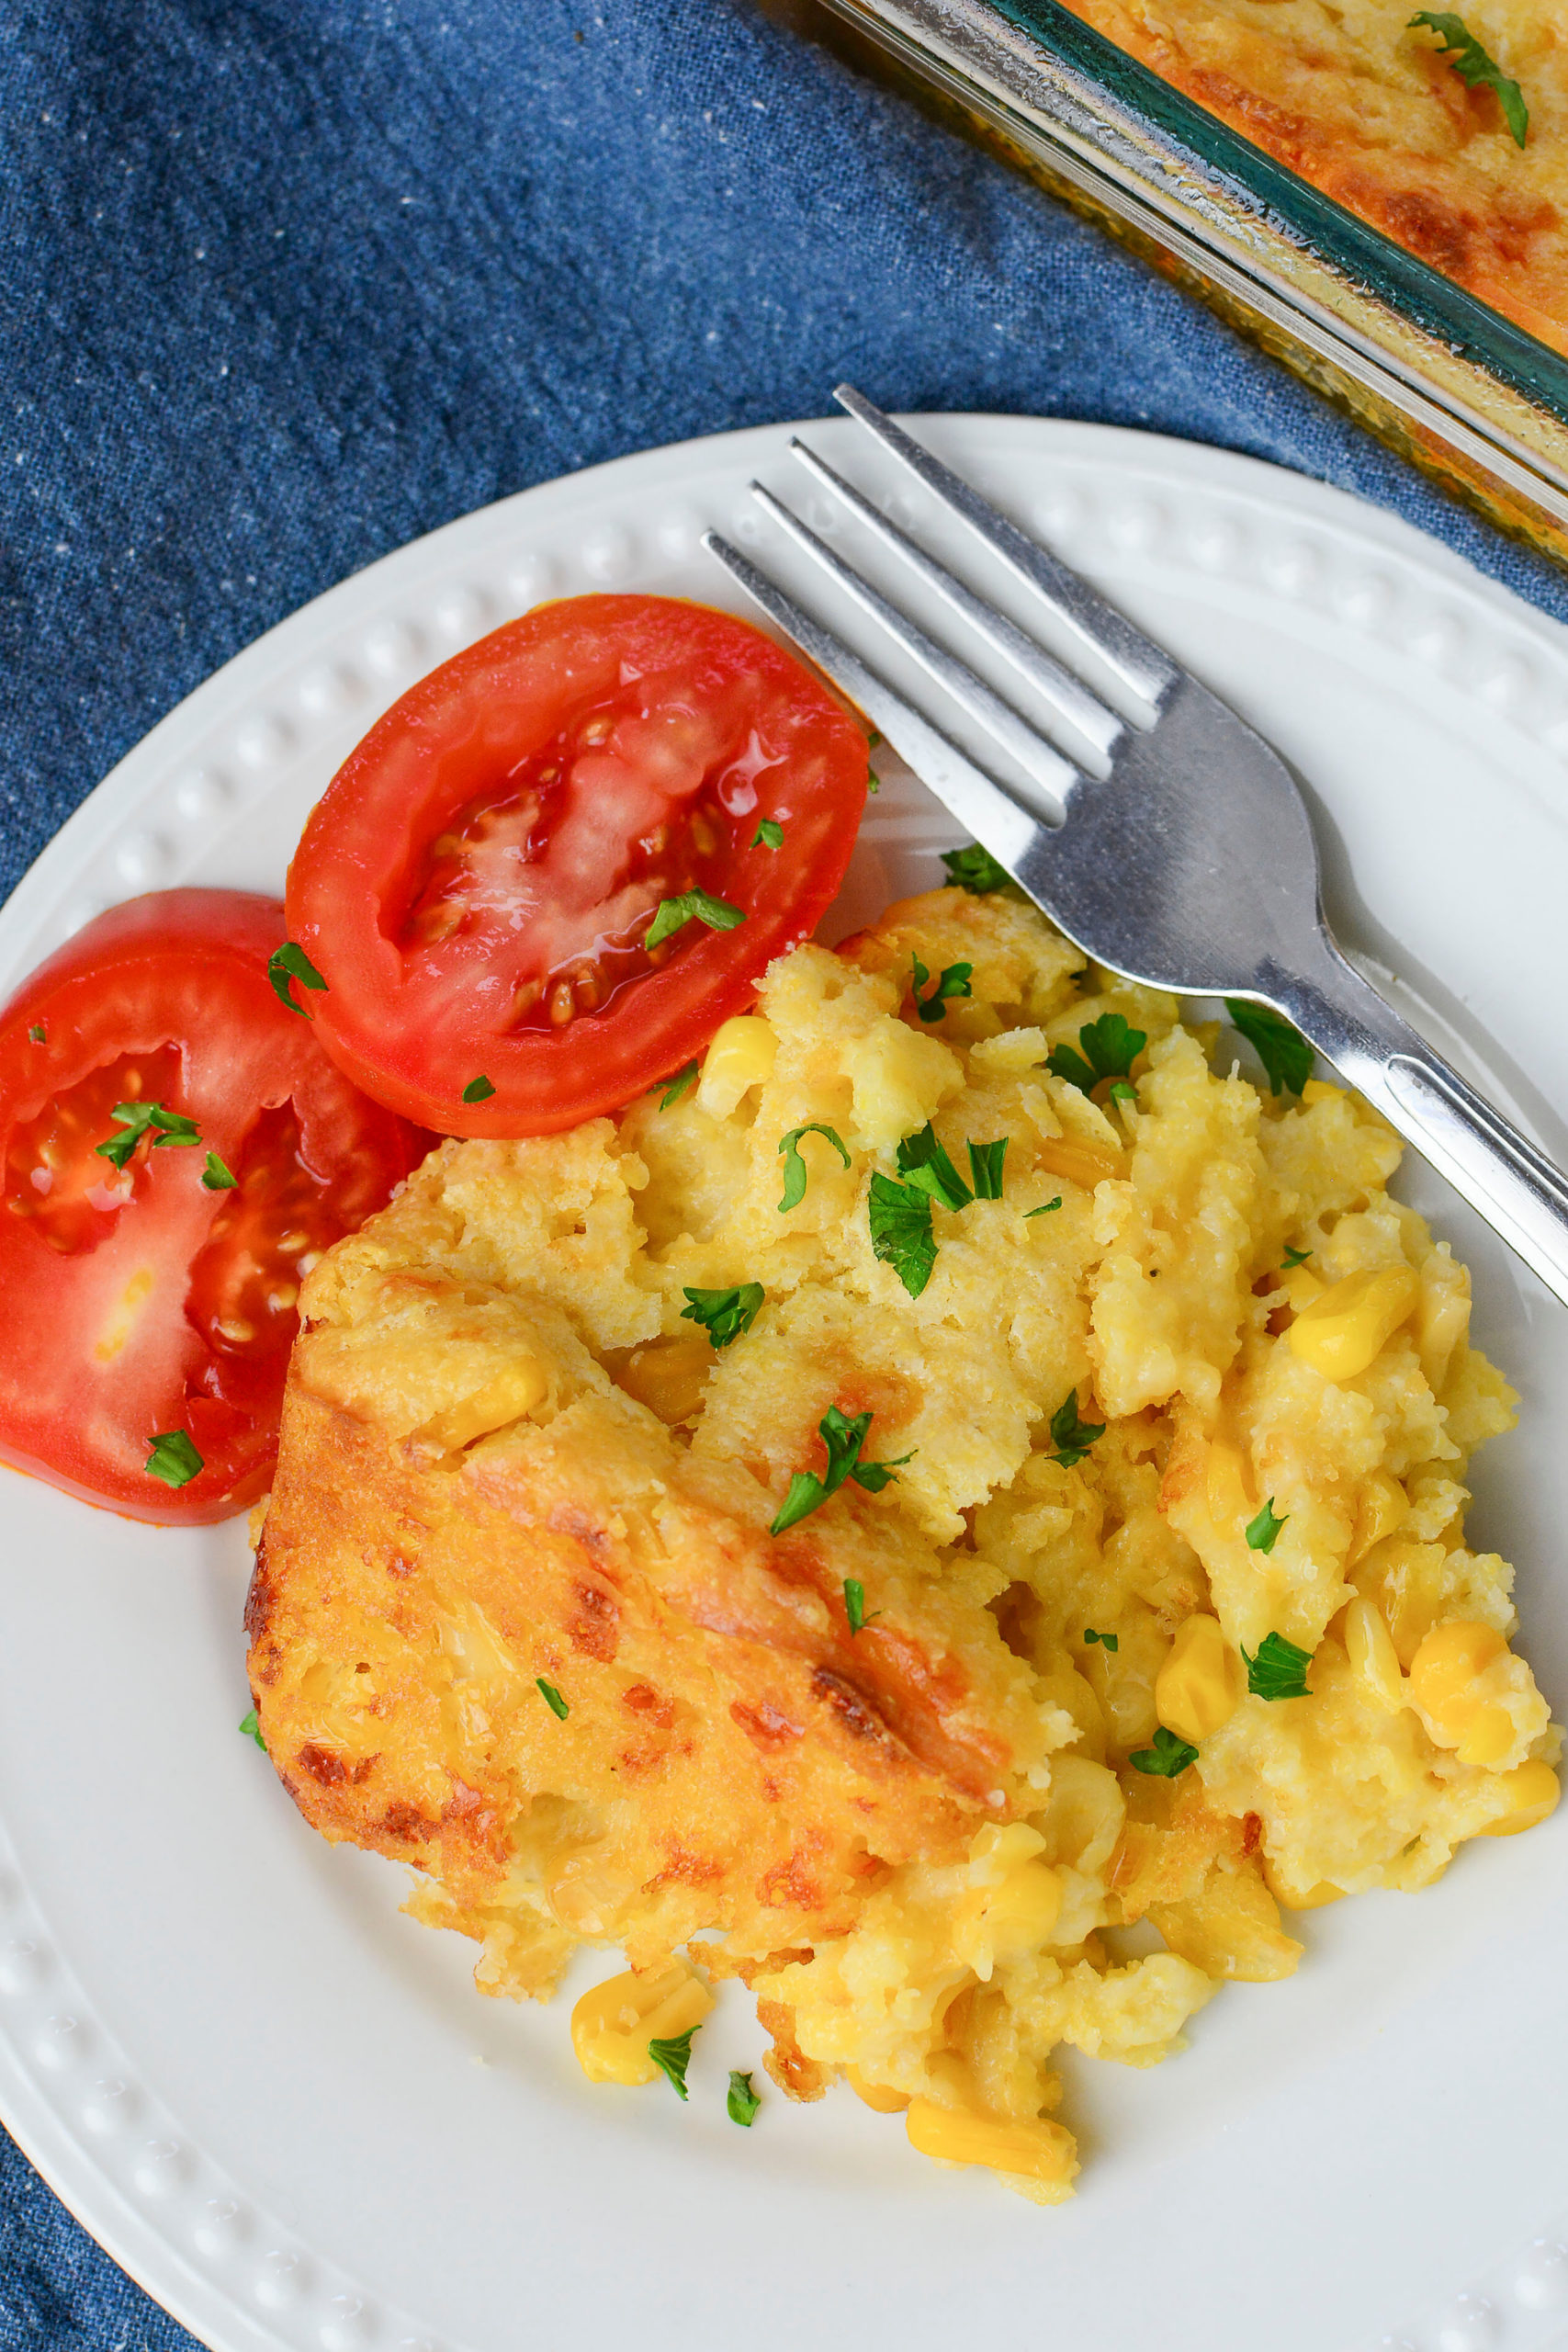  Creamy Cheese Corn Casserole with a side of tomatoes,